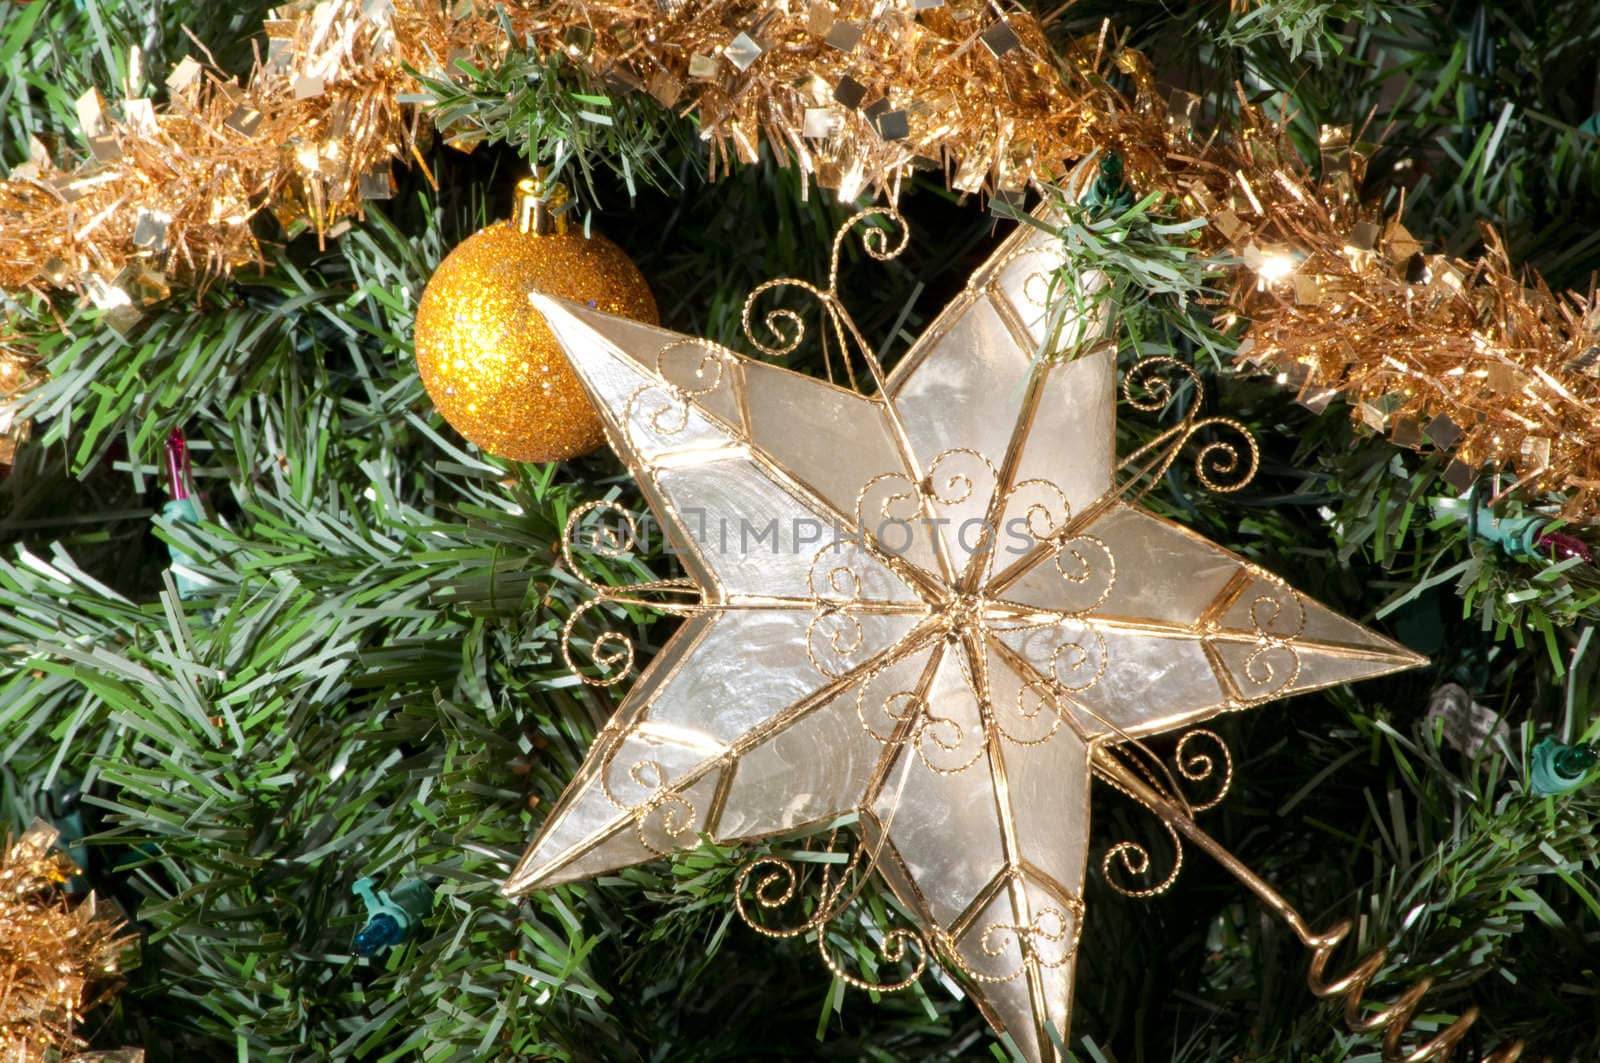 Christmas tree detail with star and ball ornaments.